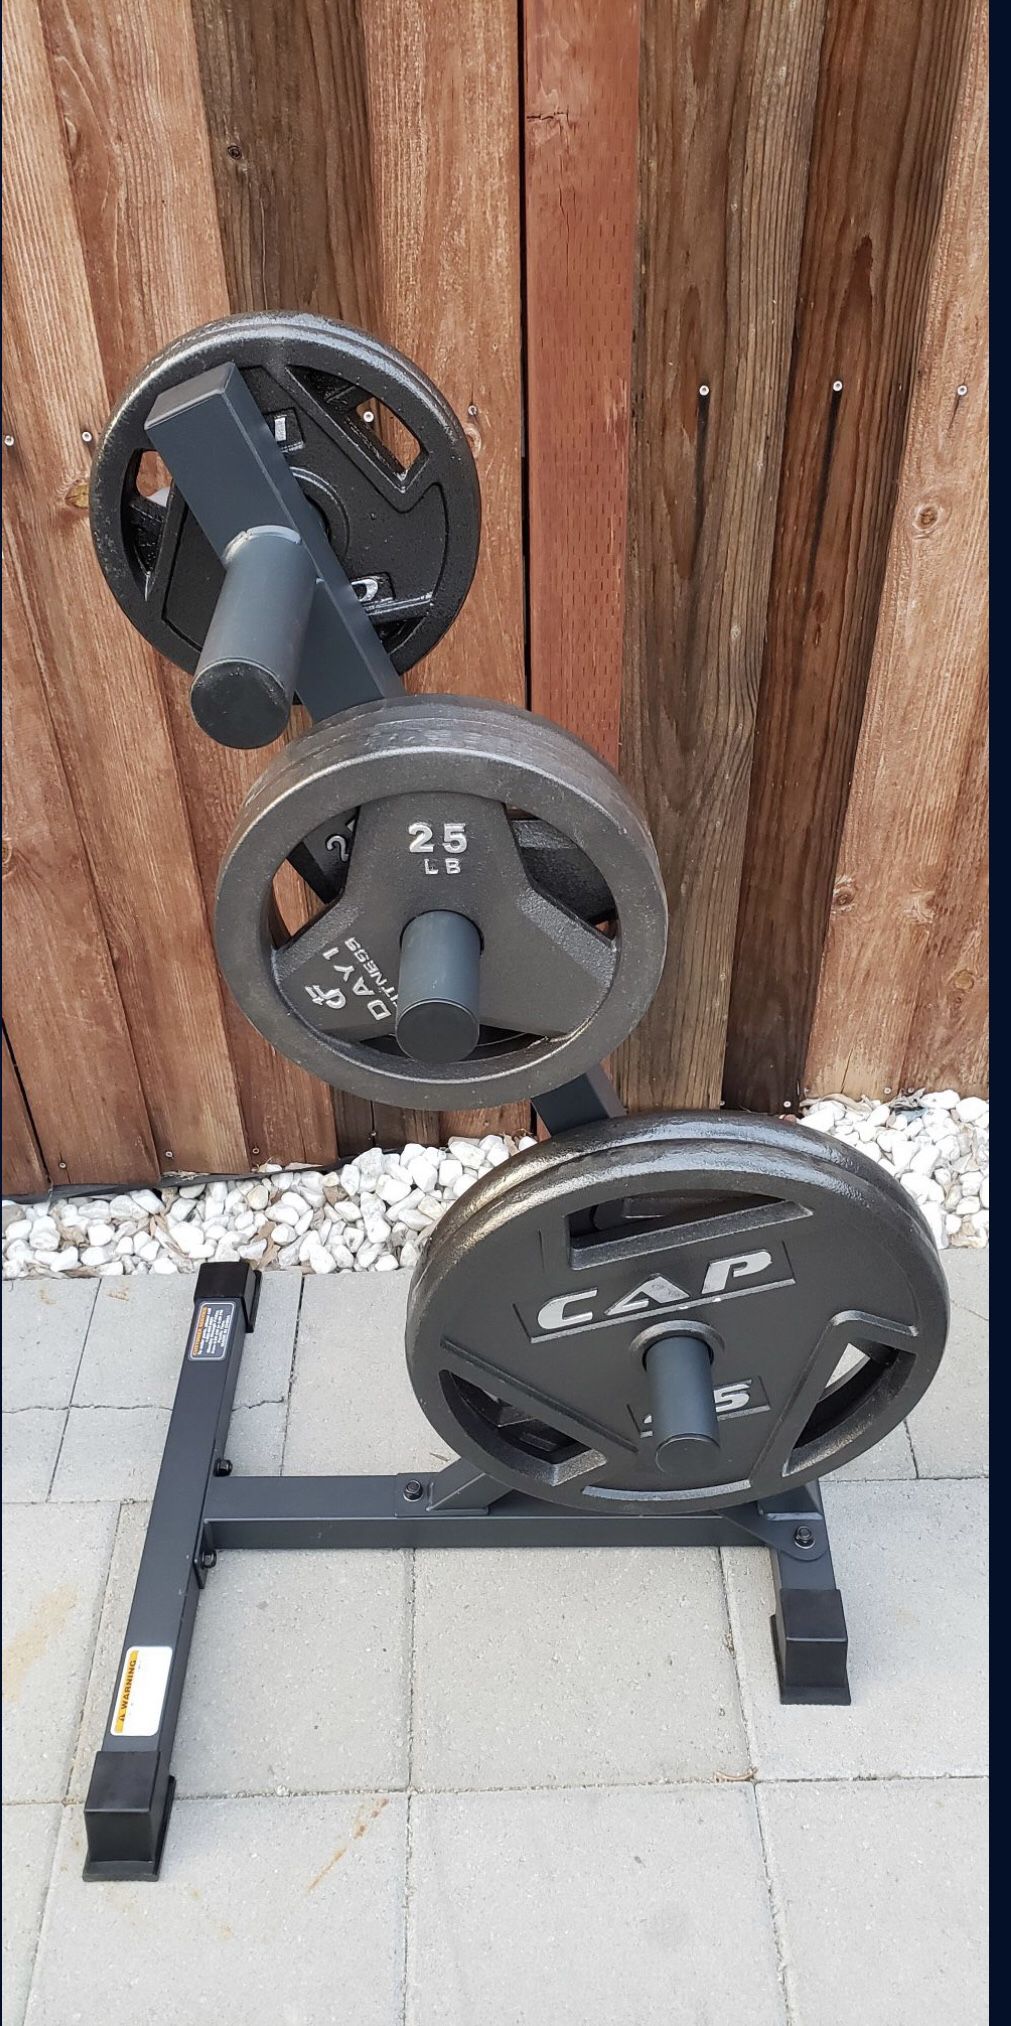 Olympic Weight Tree (new In Box) For $150. 2x 45 Lb Plates Are $250, 2x 25 Lb Plates Are $200